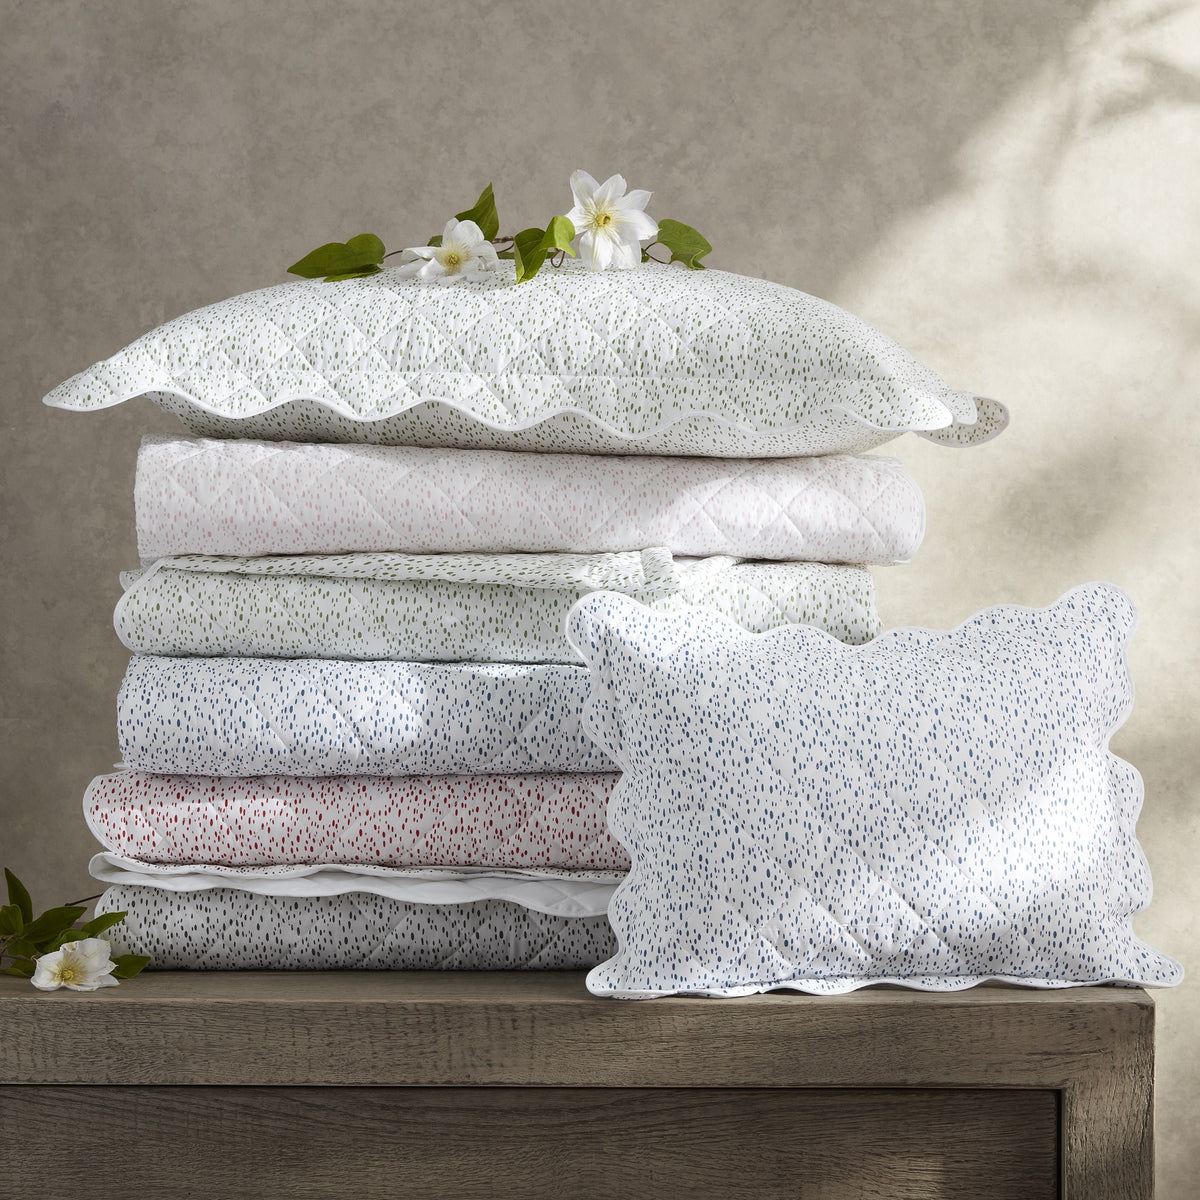 Stack of Matouk Celine Quilted Bedding in Different Colors